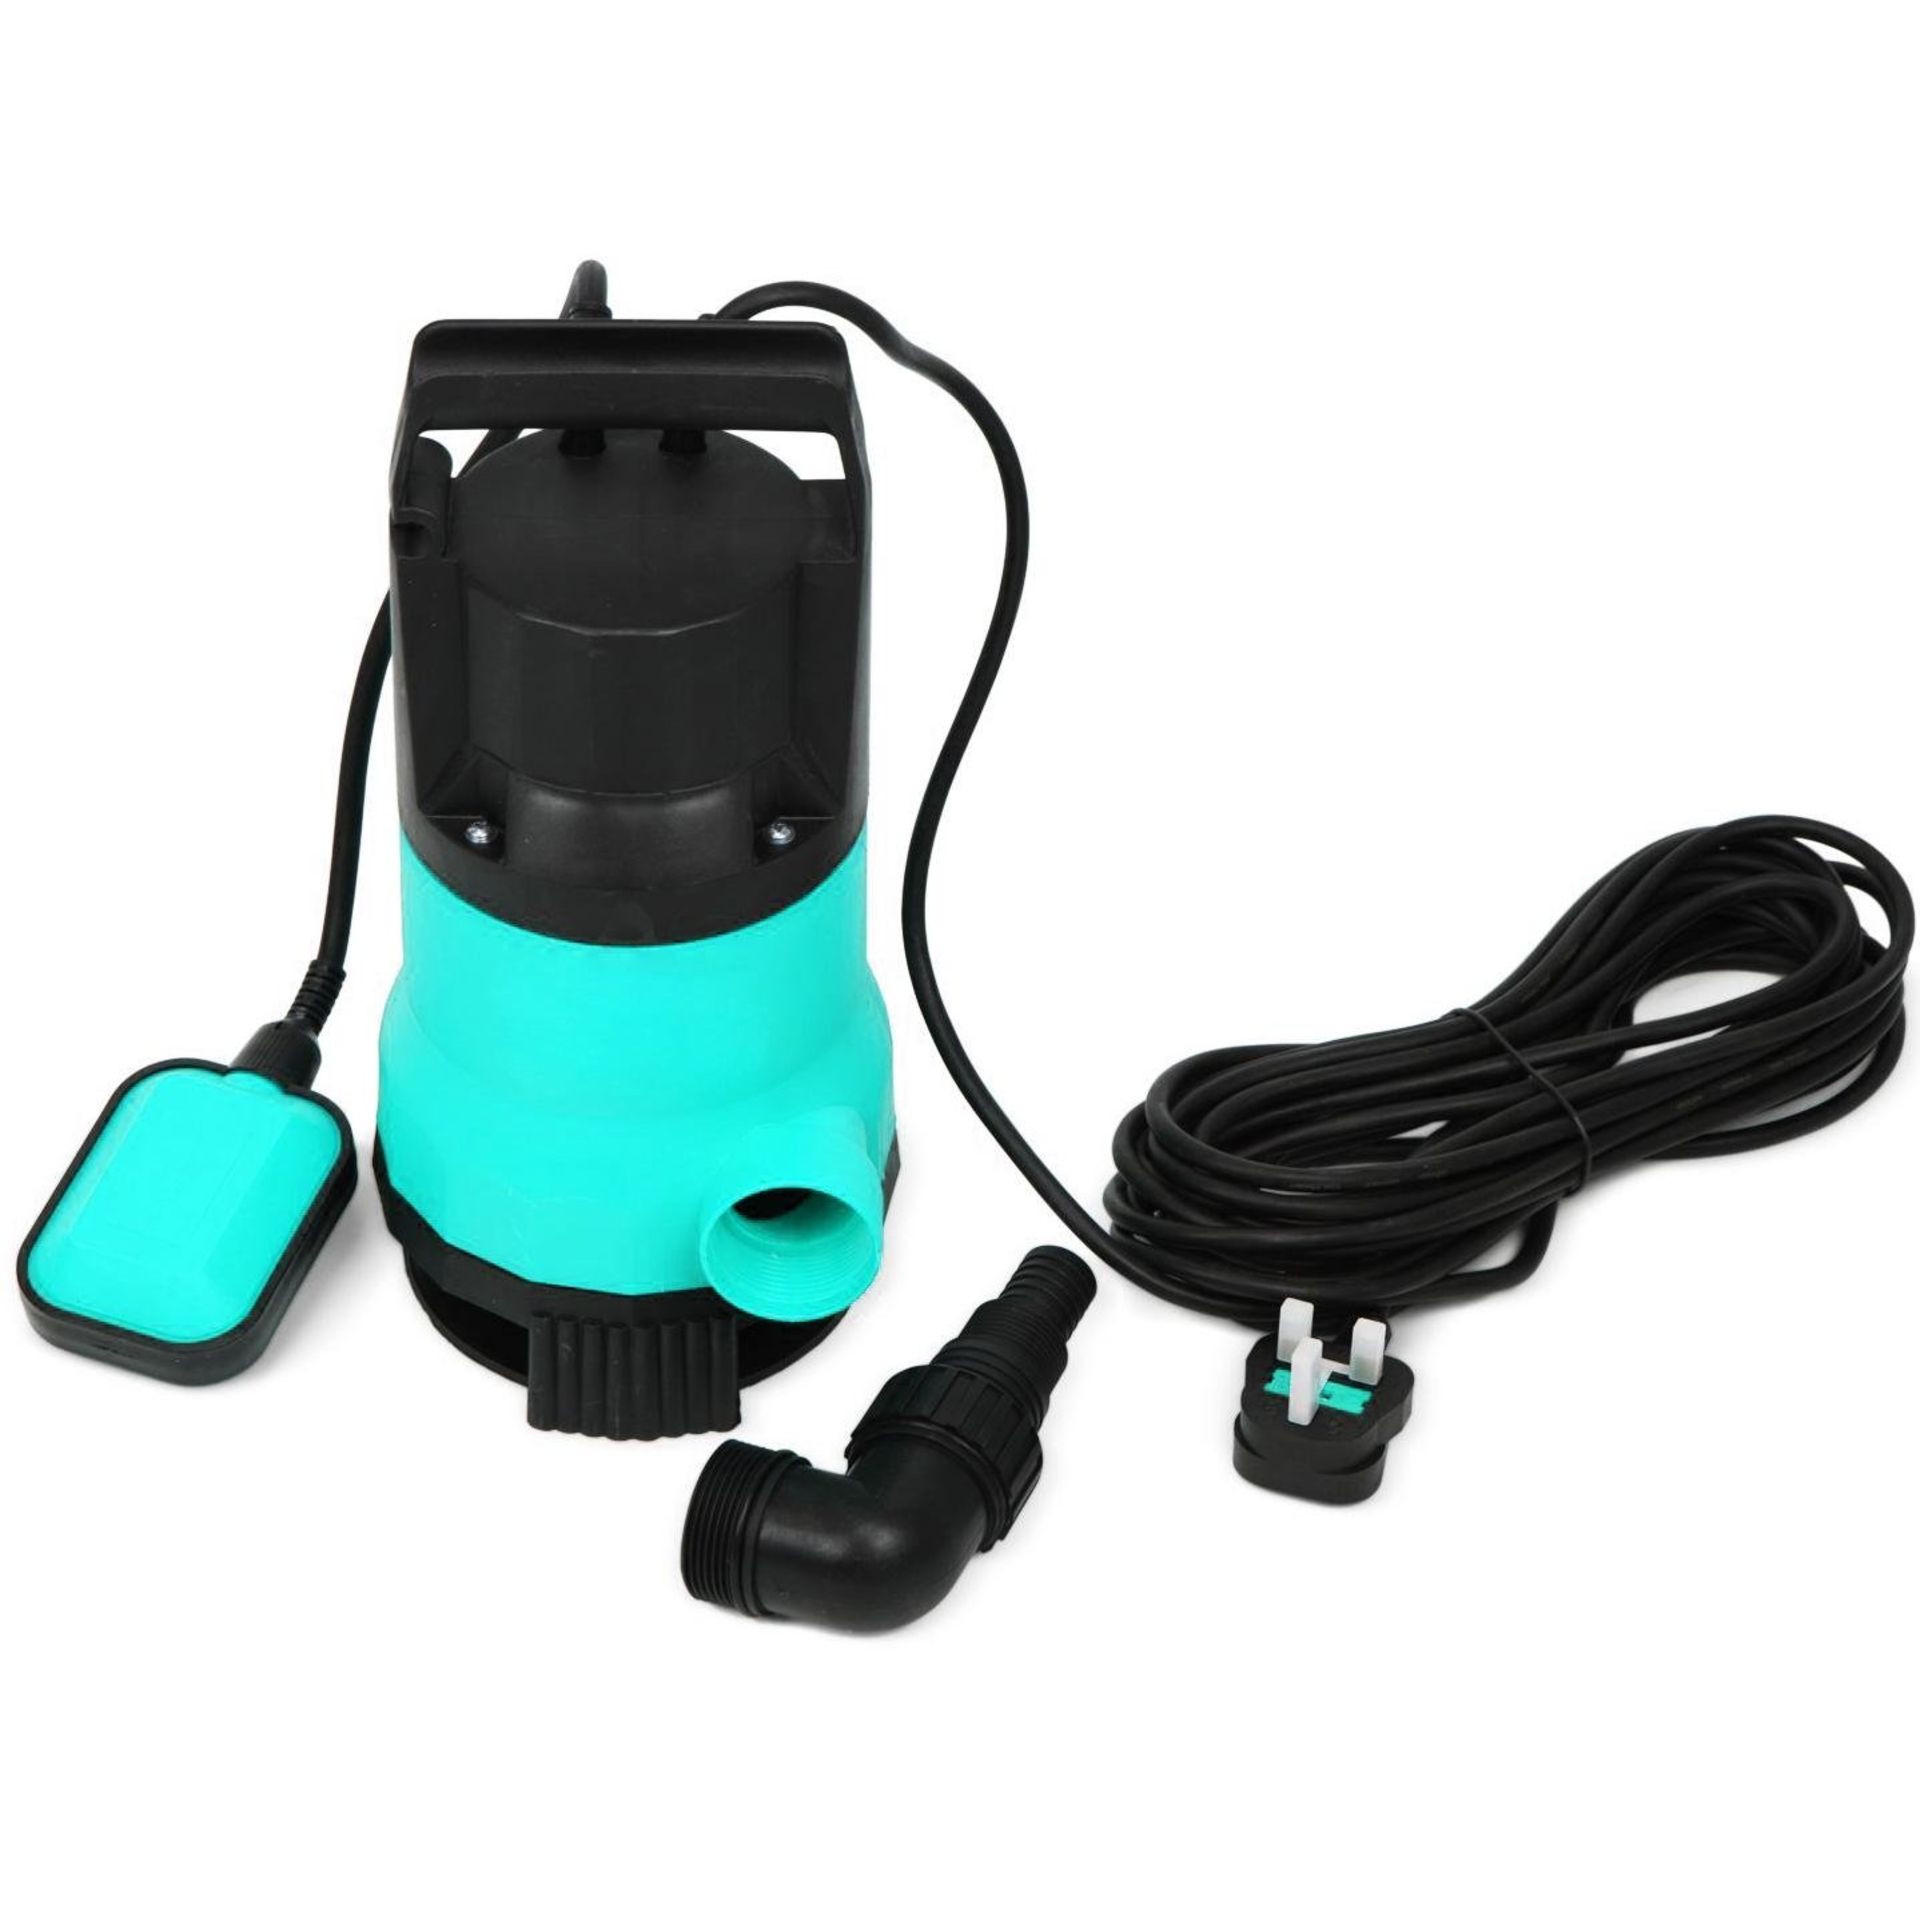 (RU385) Electric Submersible Pump for Clean or Dirty Water Our electric submersible pump is ... - Image 2 of 2